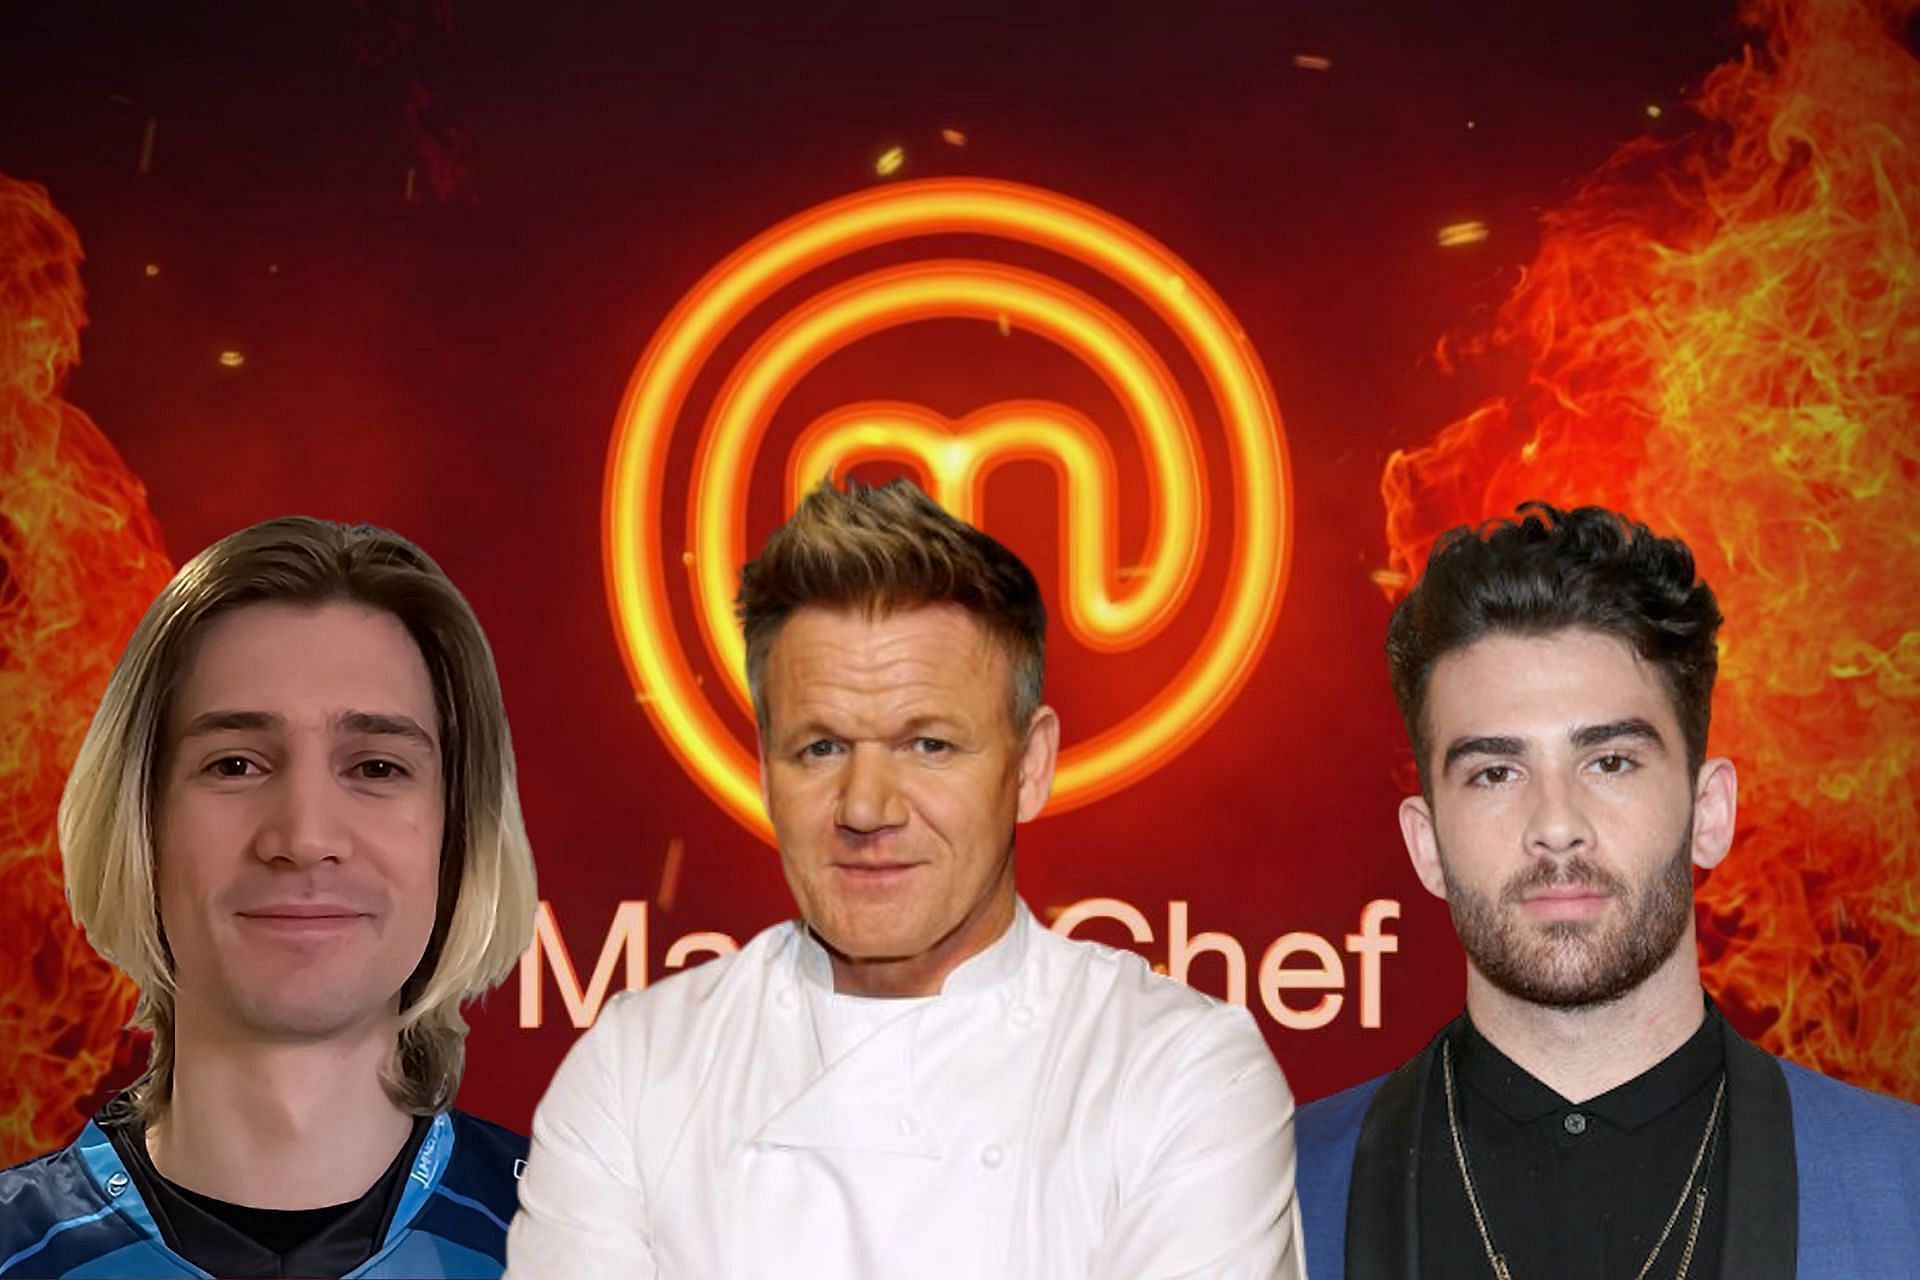 Gordon Ramsay joked about his new show being available to watch on Twitch recently. (Image via Sportskeeda)